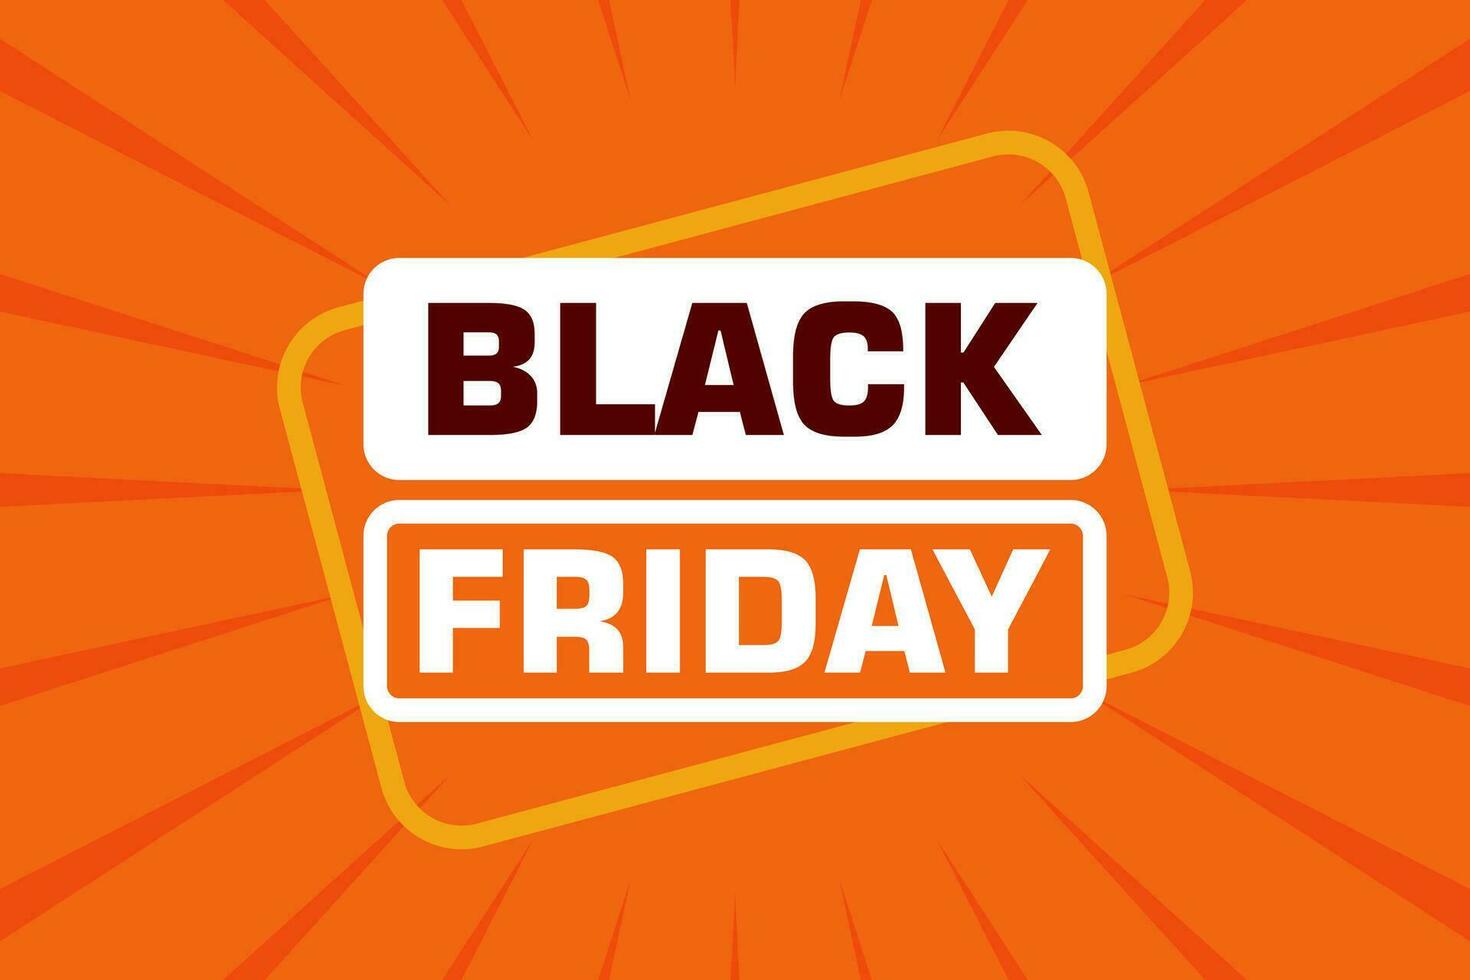 Black Friday labels banners design. Festive template can be used for invitation cards, flyers, posters. vector